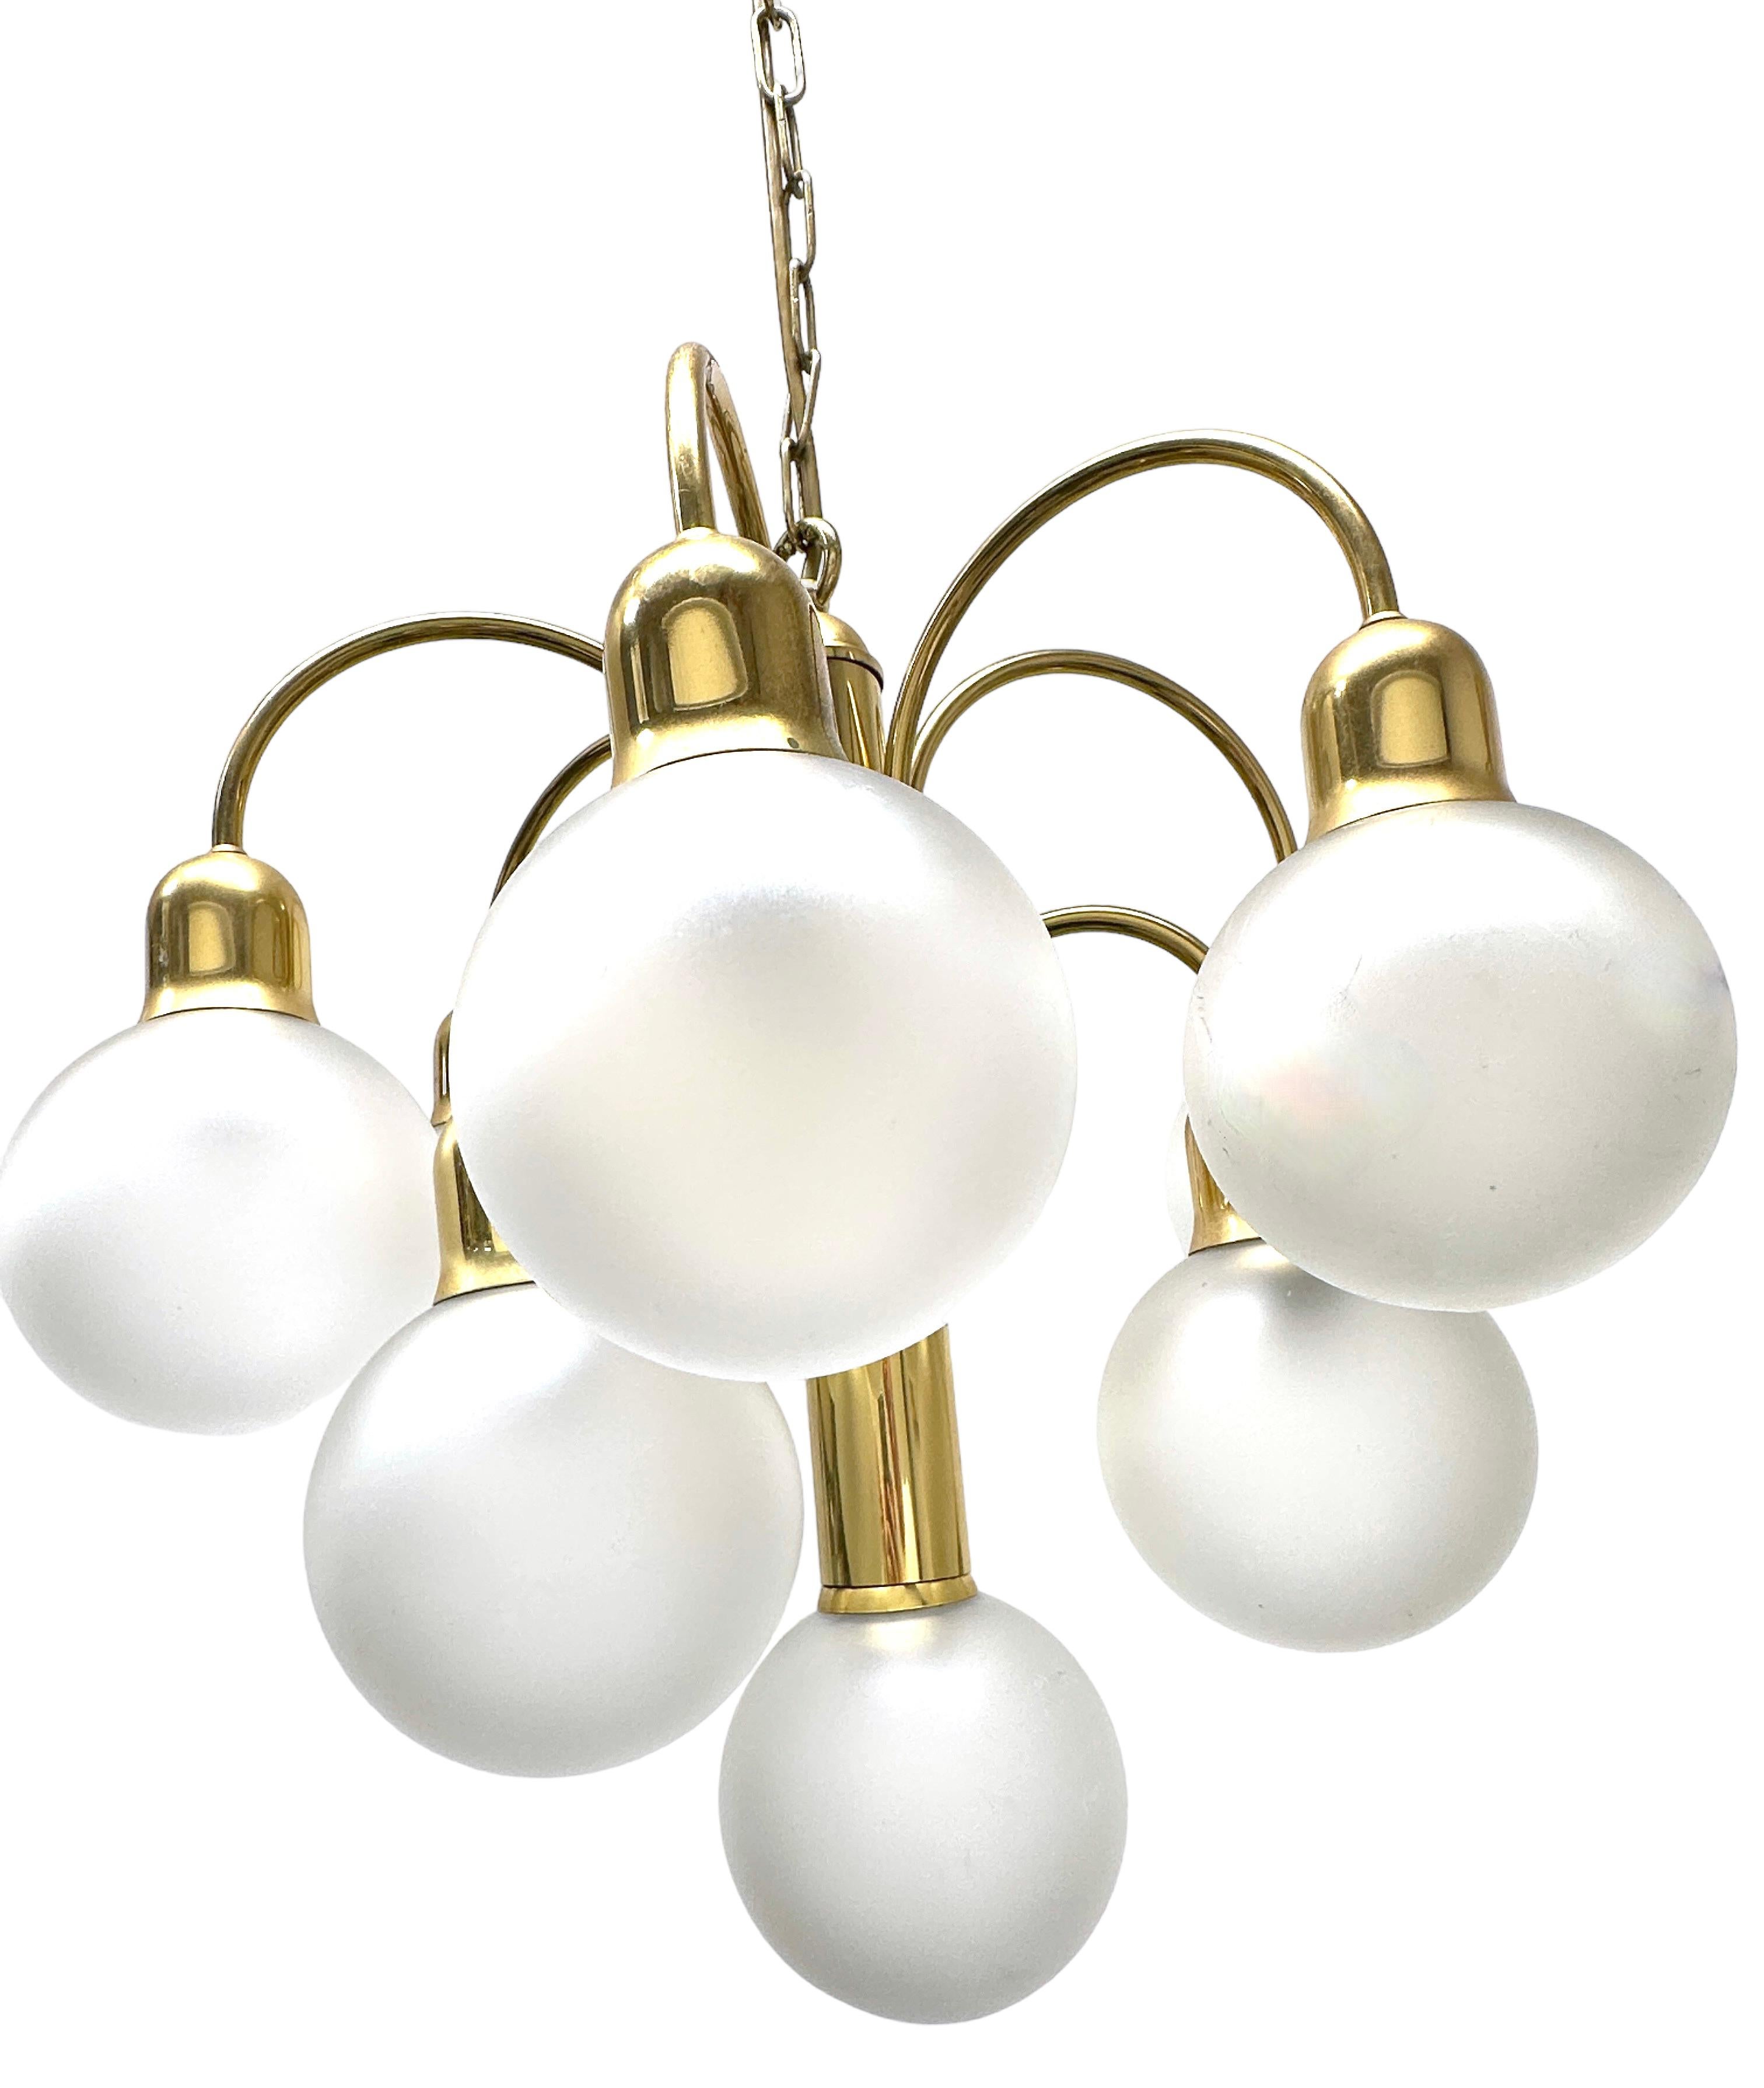 Very decorative and beautiful chandelier made of brass, fitted with ten E14 sockets with frosted glass ball shades. Vintage tiered chandelier made of gilt brass and frosted glass of exceptional beauty is perfect for installation on the ceiling of a